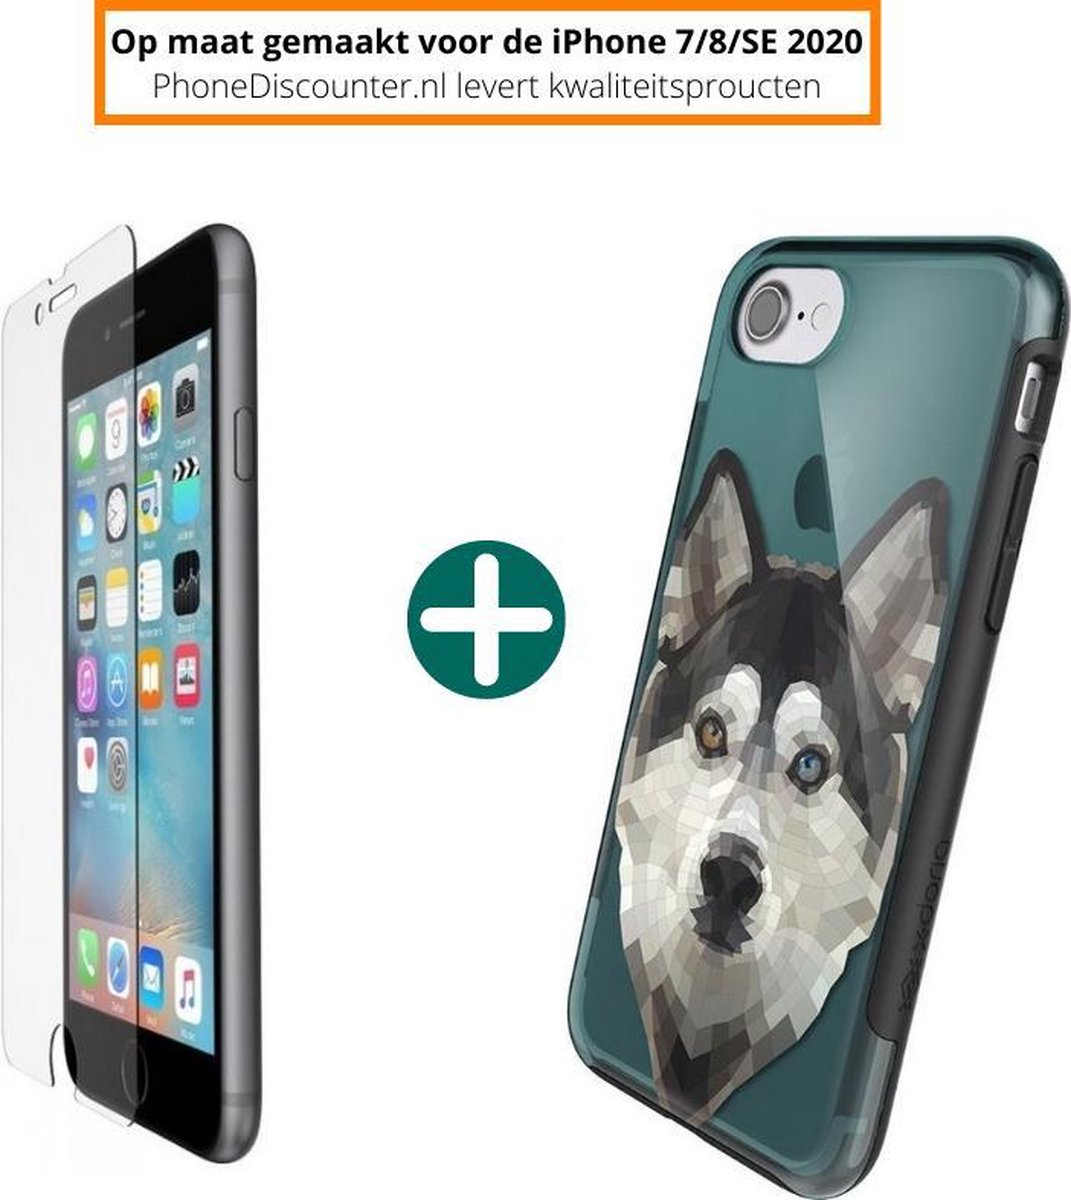 iphone 7 beschermhoes | iPhone 7 case | iPhone 7 hoes wolf grijs| hoesje iPhone 7 apple | iPhone 7 hoes Cover Hoesjes + iPhone 7 Screen Protector Glas Screenprotector